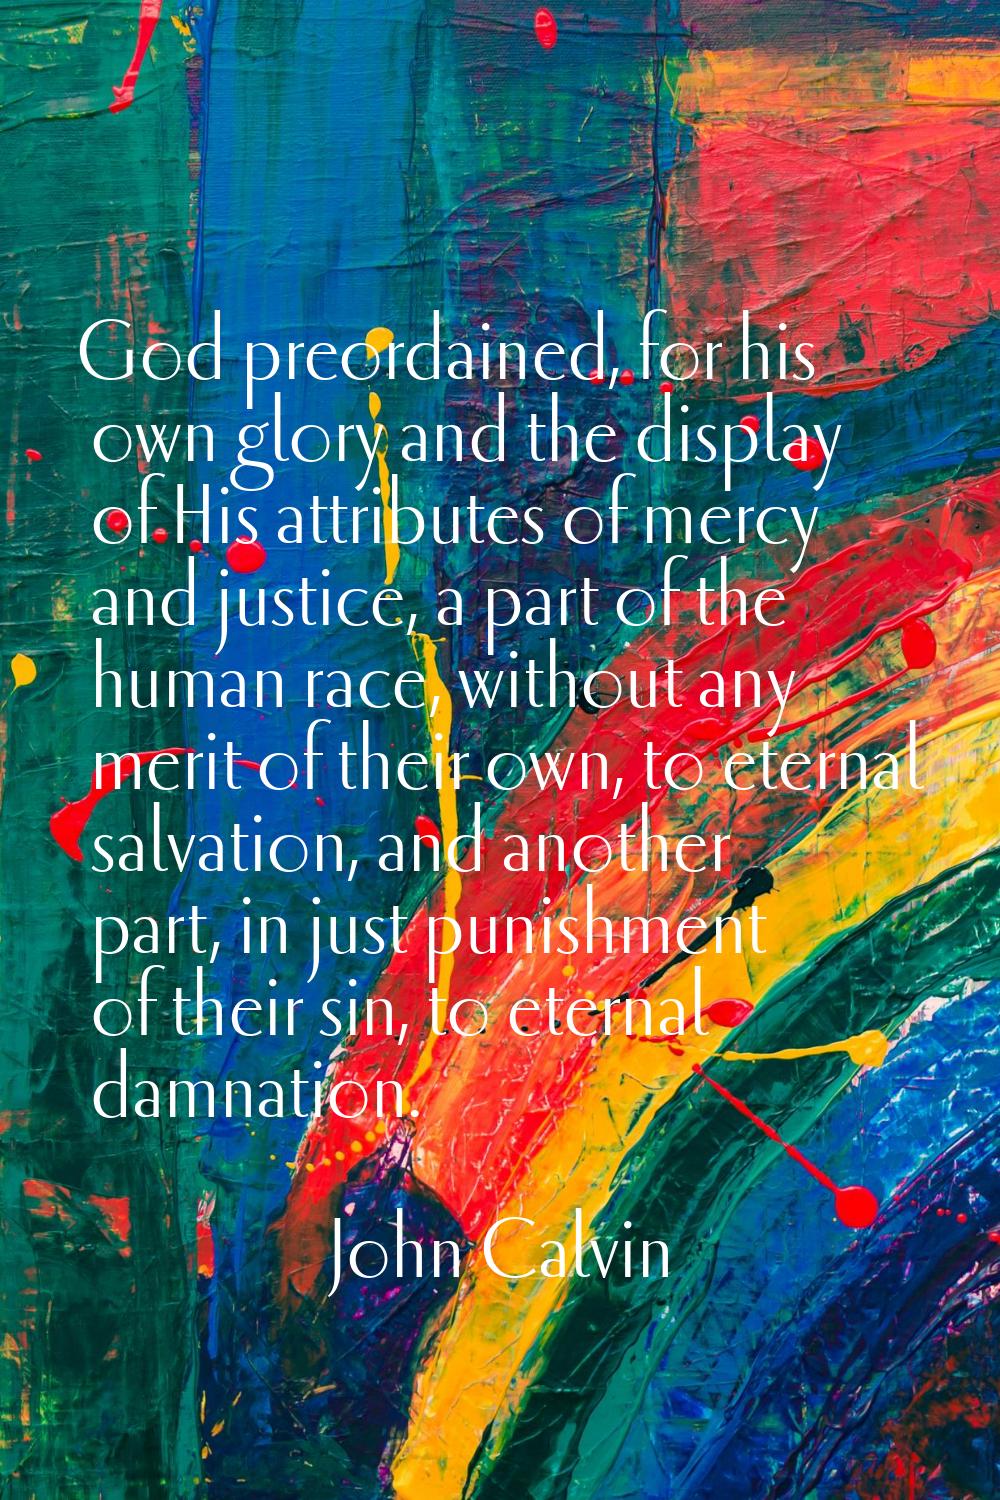 God preordained, for his own glory and the display of His attributes of mercy and justice, a part o